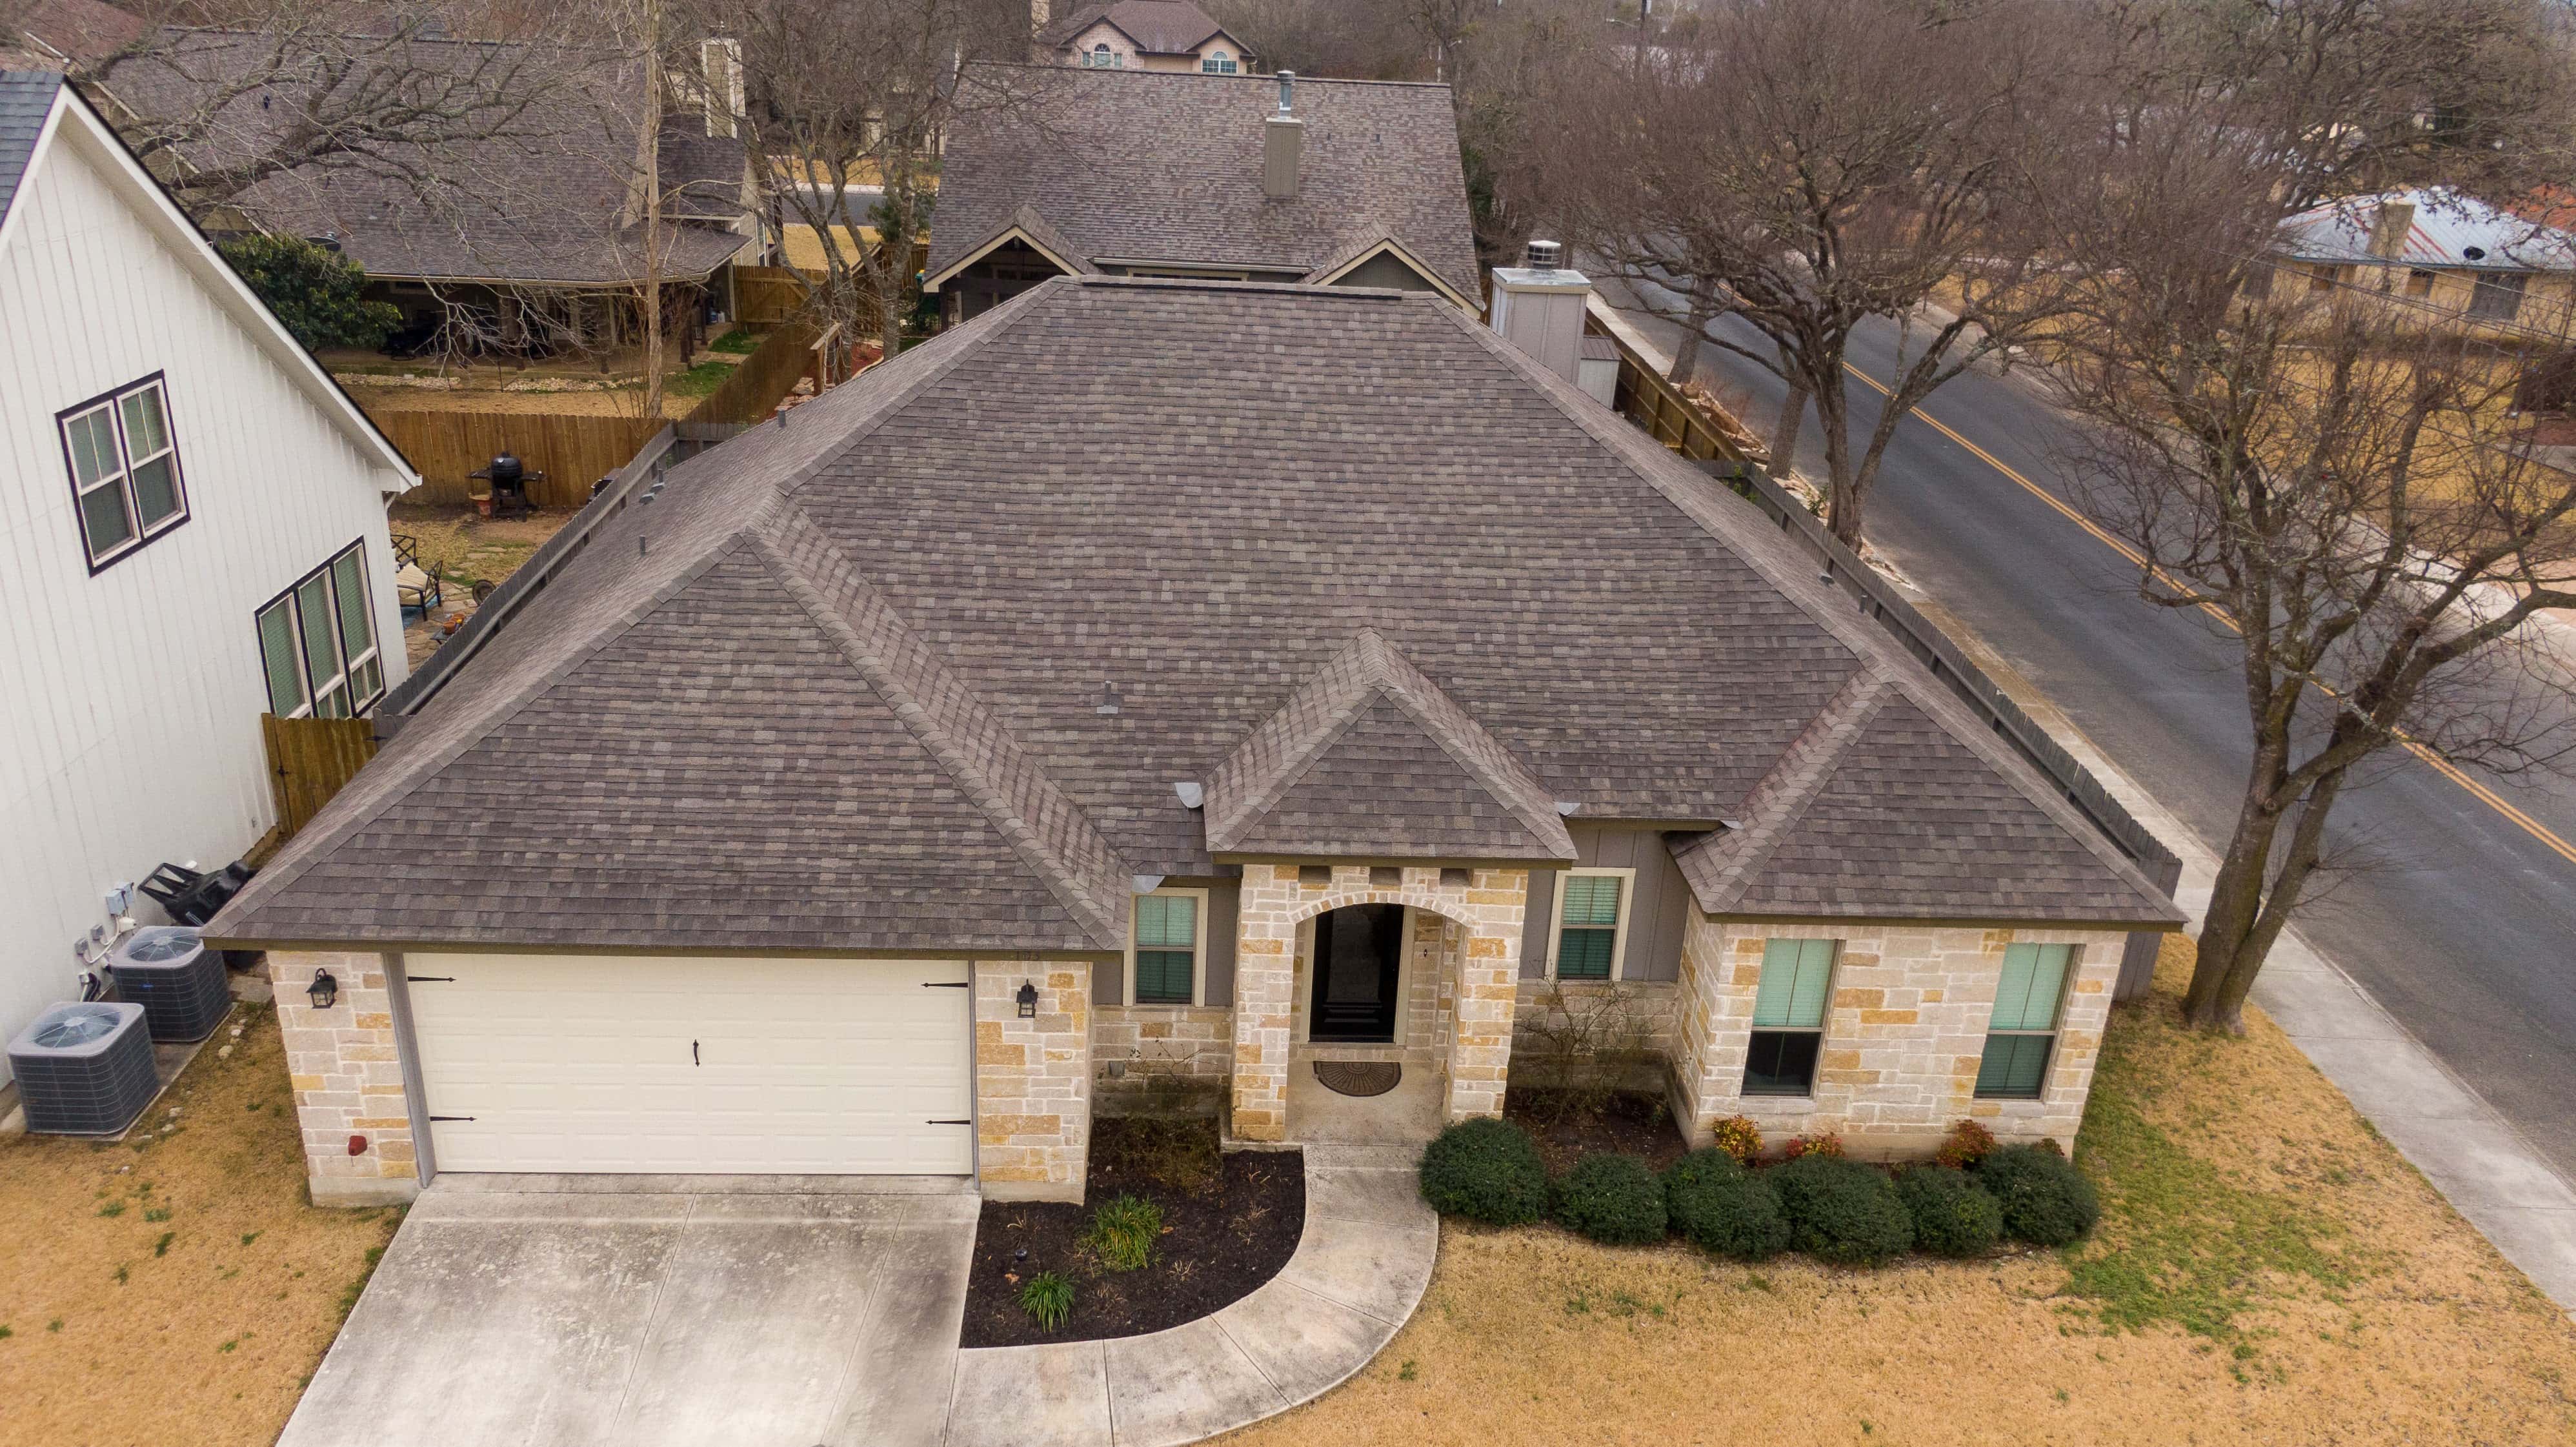 Soukup Roofing LLC - Helotes, TX, US, commercial metal roofing